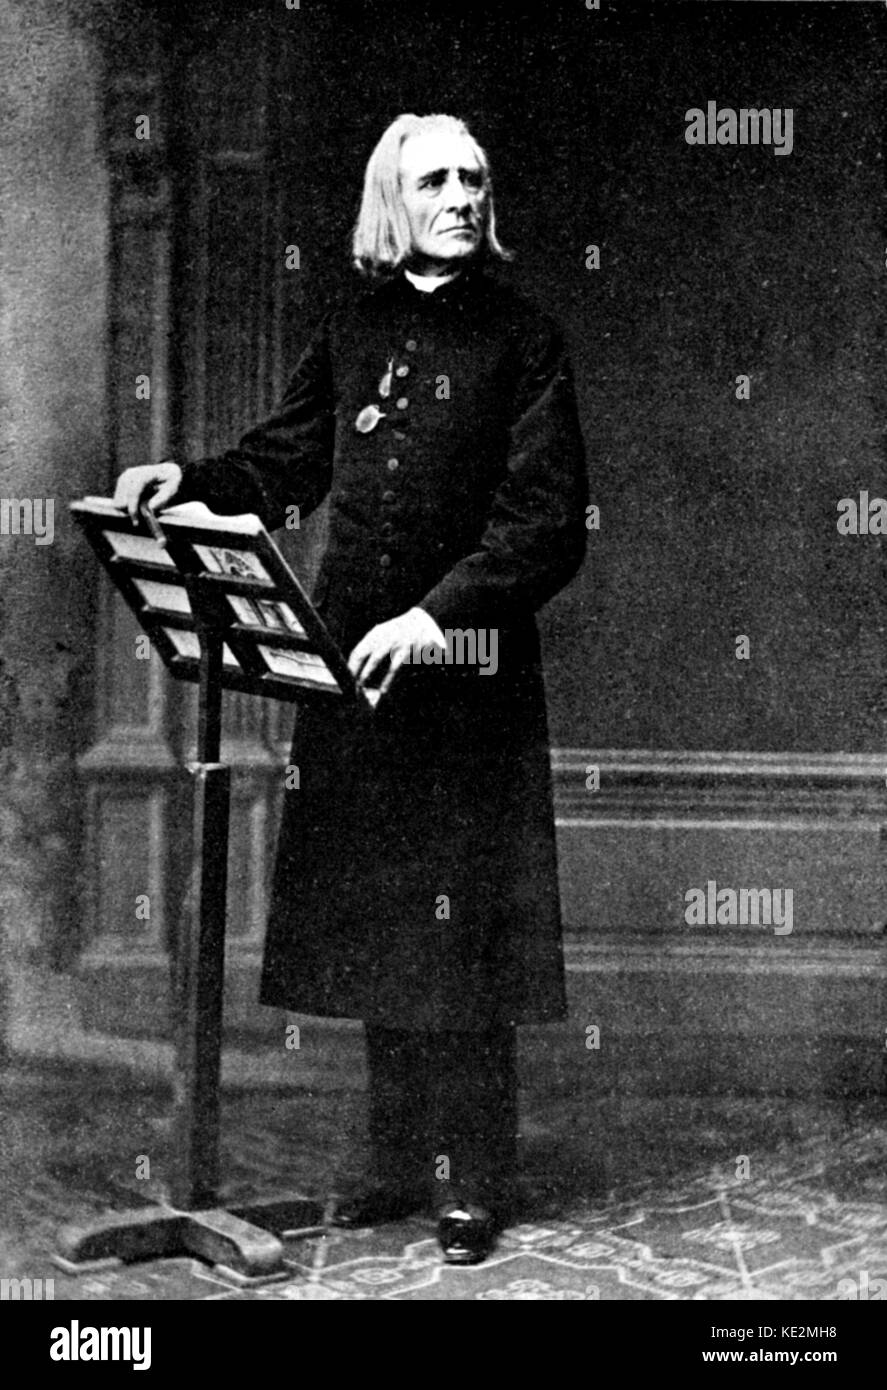 BBC Radio 3 - Composer of the Week, Camille Saint-Saëns (1835-1921